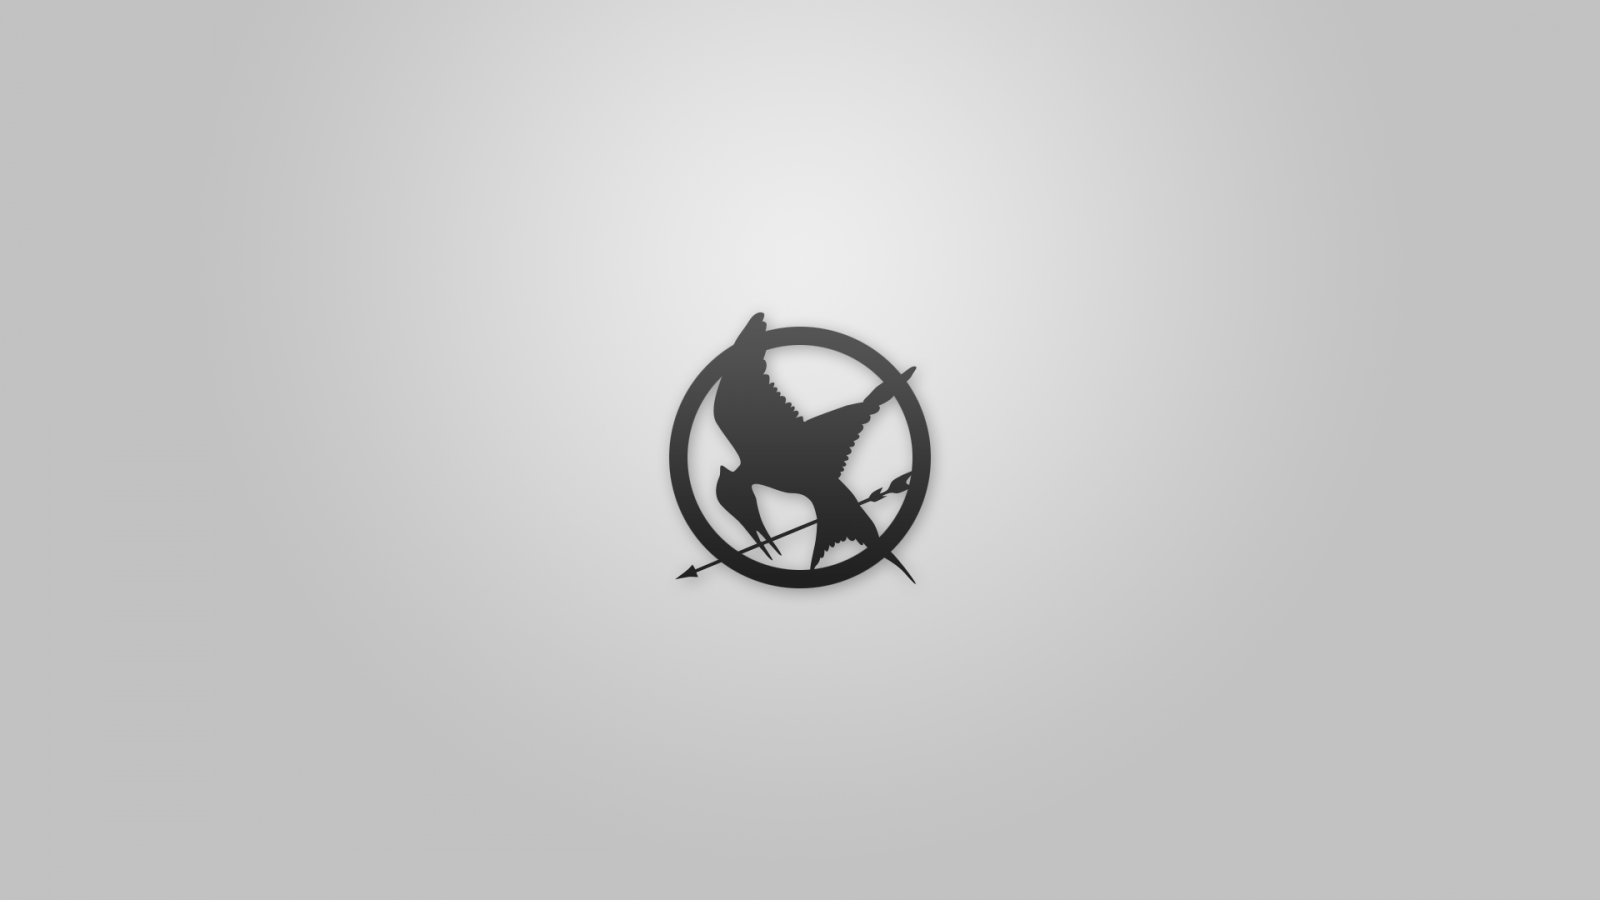 The Hunger Games 4K Minimal Wallpapers